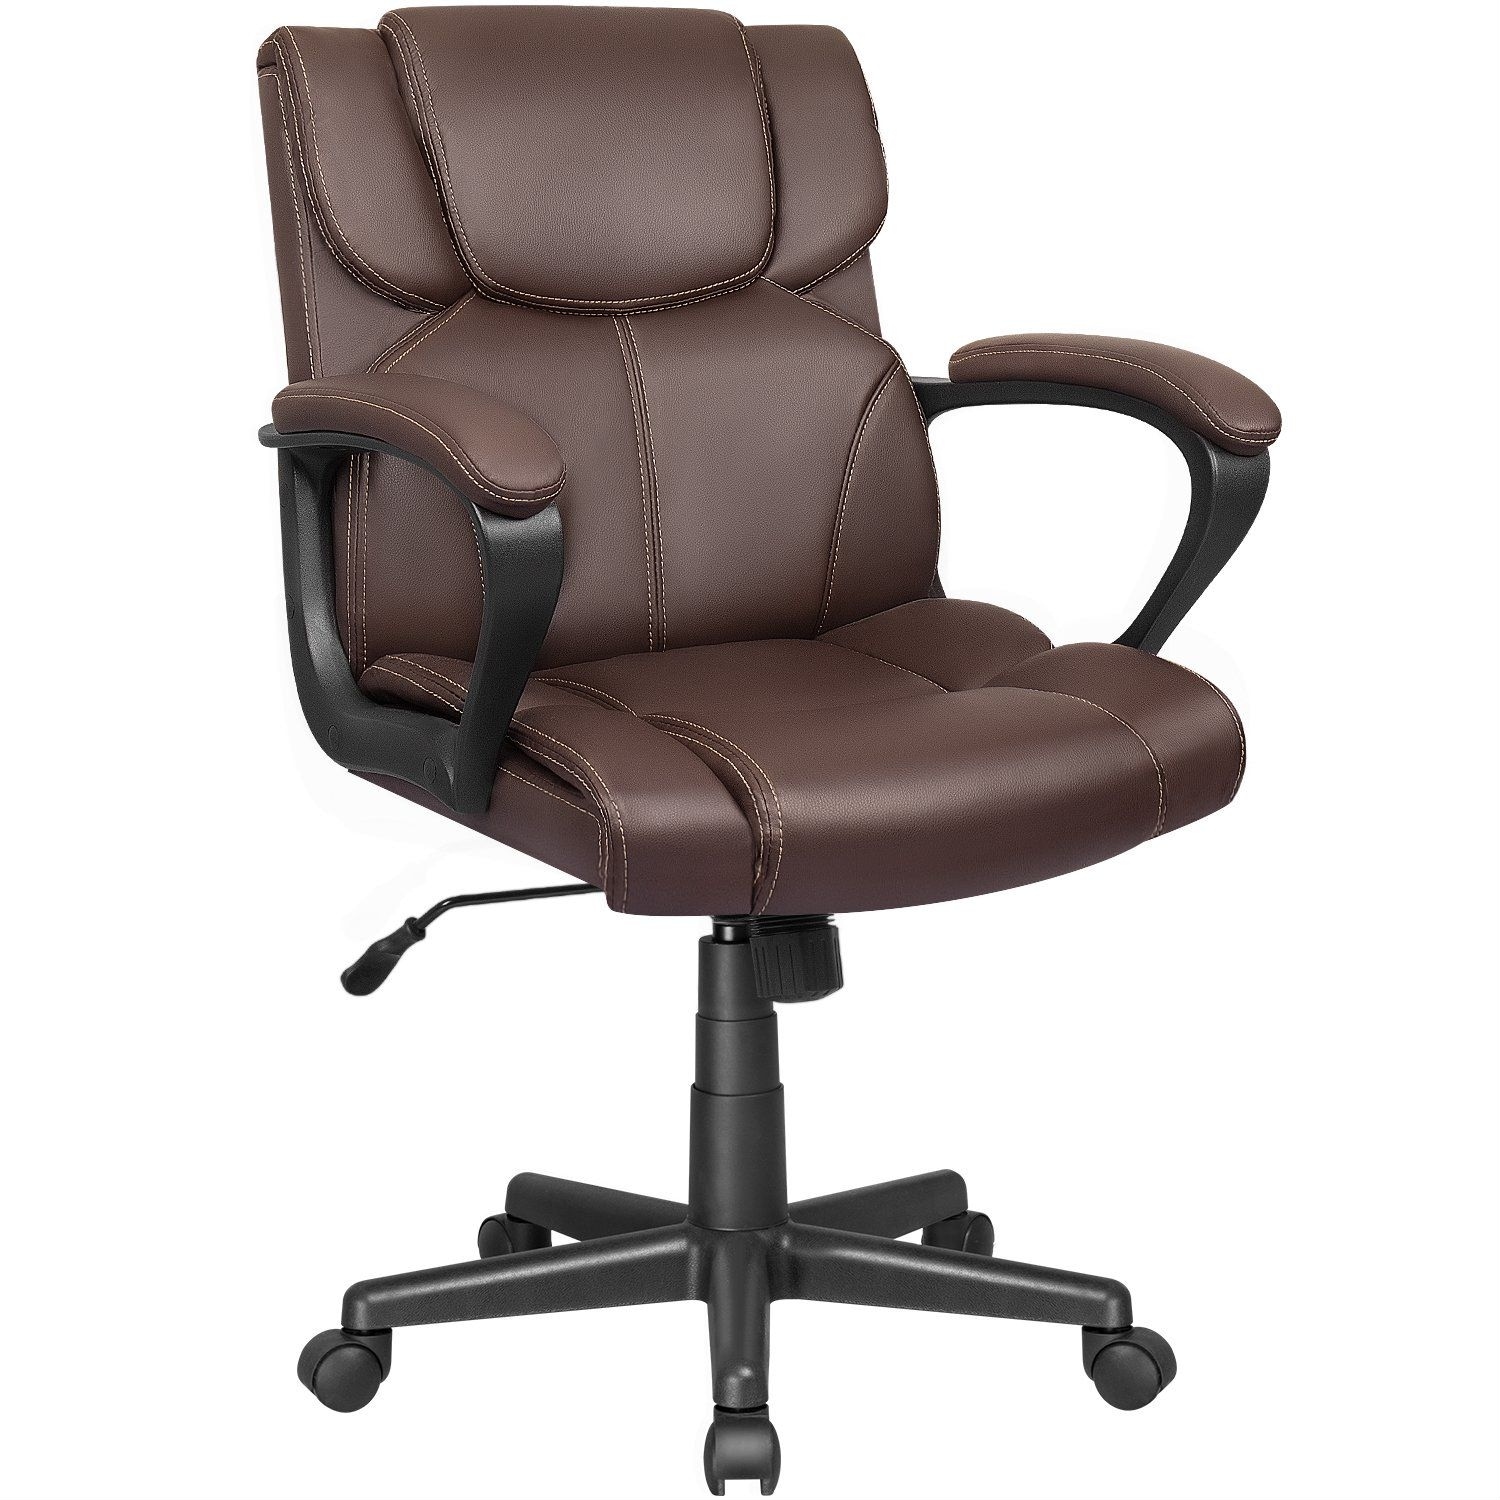 https://ak1.ostkcdn.com/images/products/is/images/direct/2d6143897040e5af1a8fd5c7768d2fc761cc4152/Homall-Mid-Back-Office-Chair-Swivel-Computer-Task-Chair-with-Armrest-Ergonomic-Leather-Padded-Executive-Desk-Chair.jpg